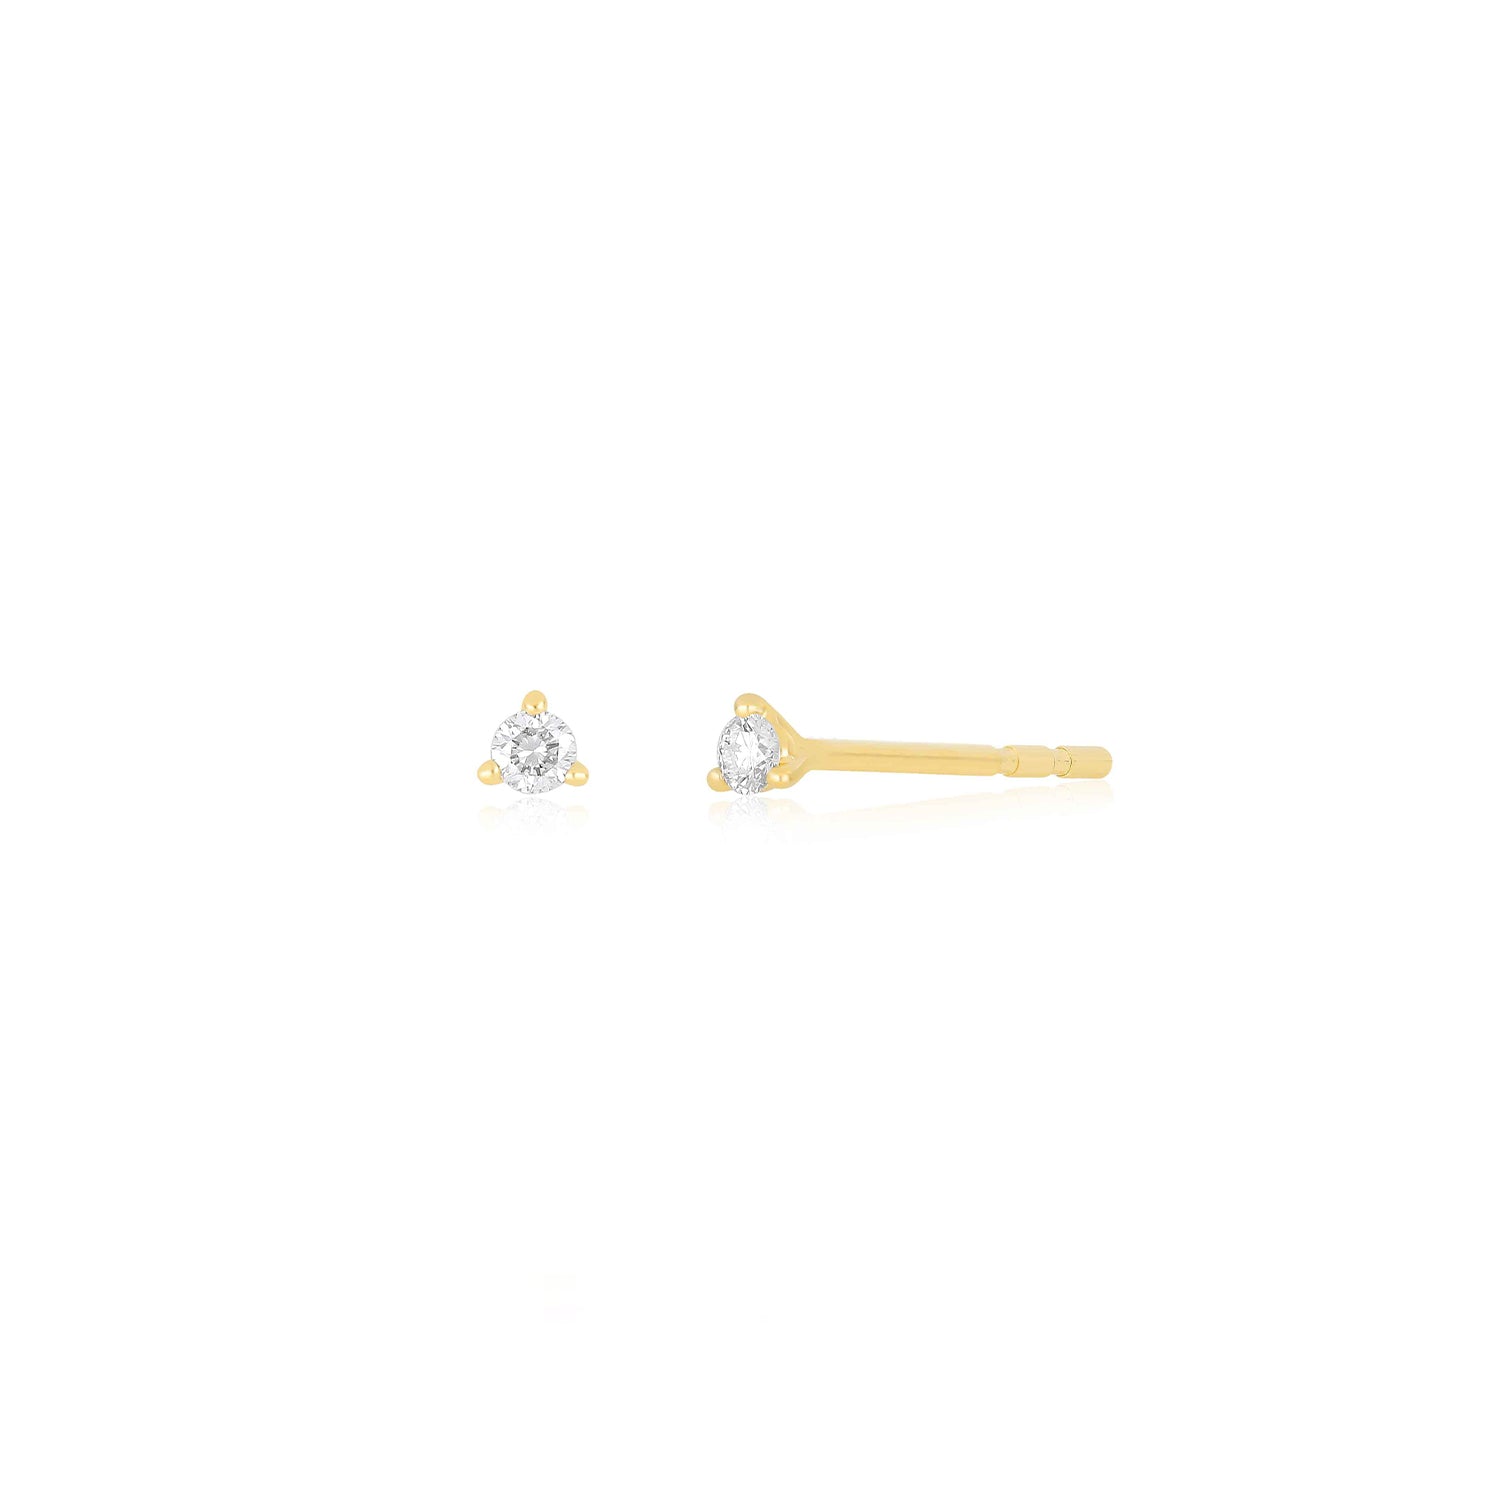 Baby Solitaire Diamond Stud Earring in 14k yellow gold